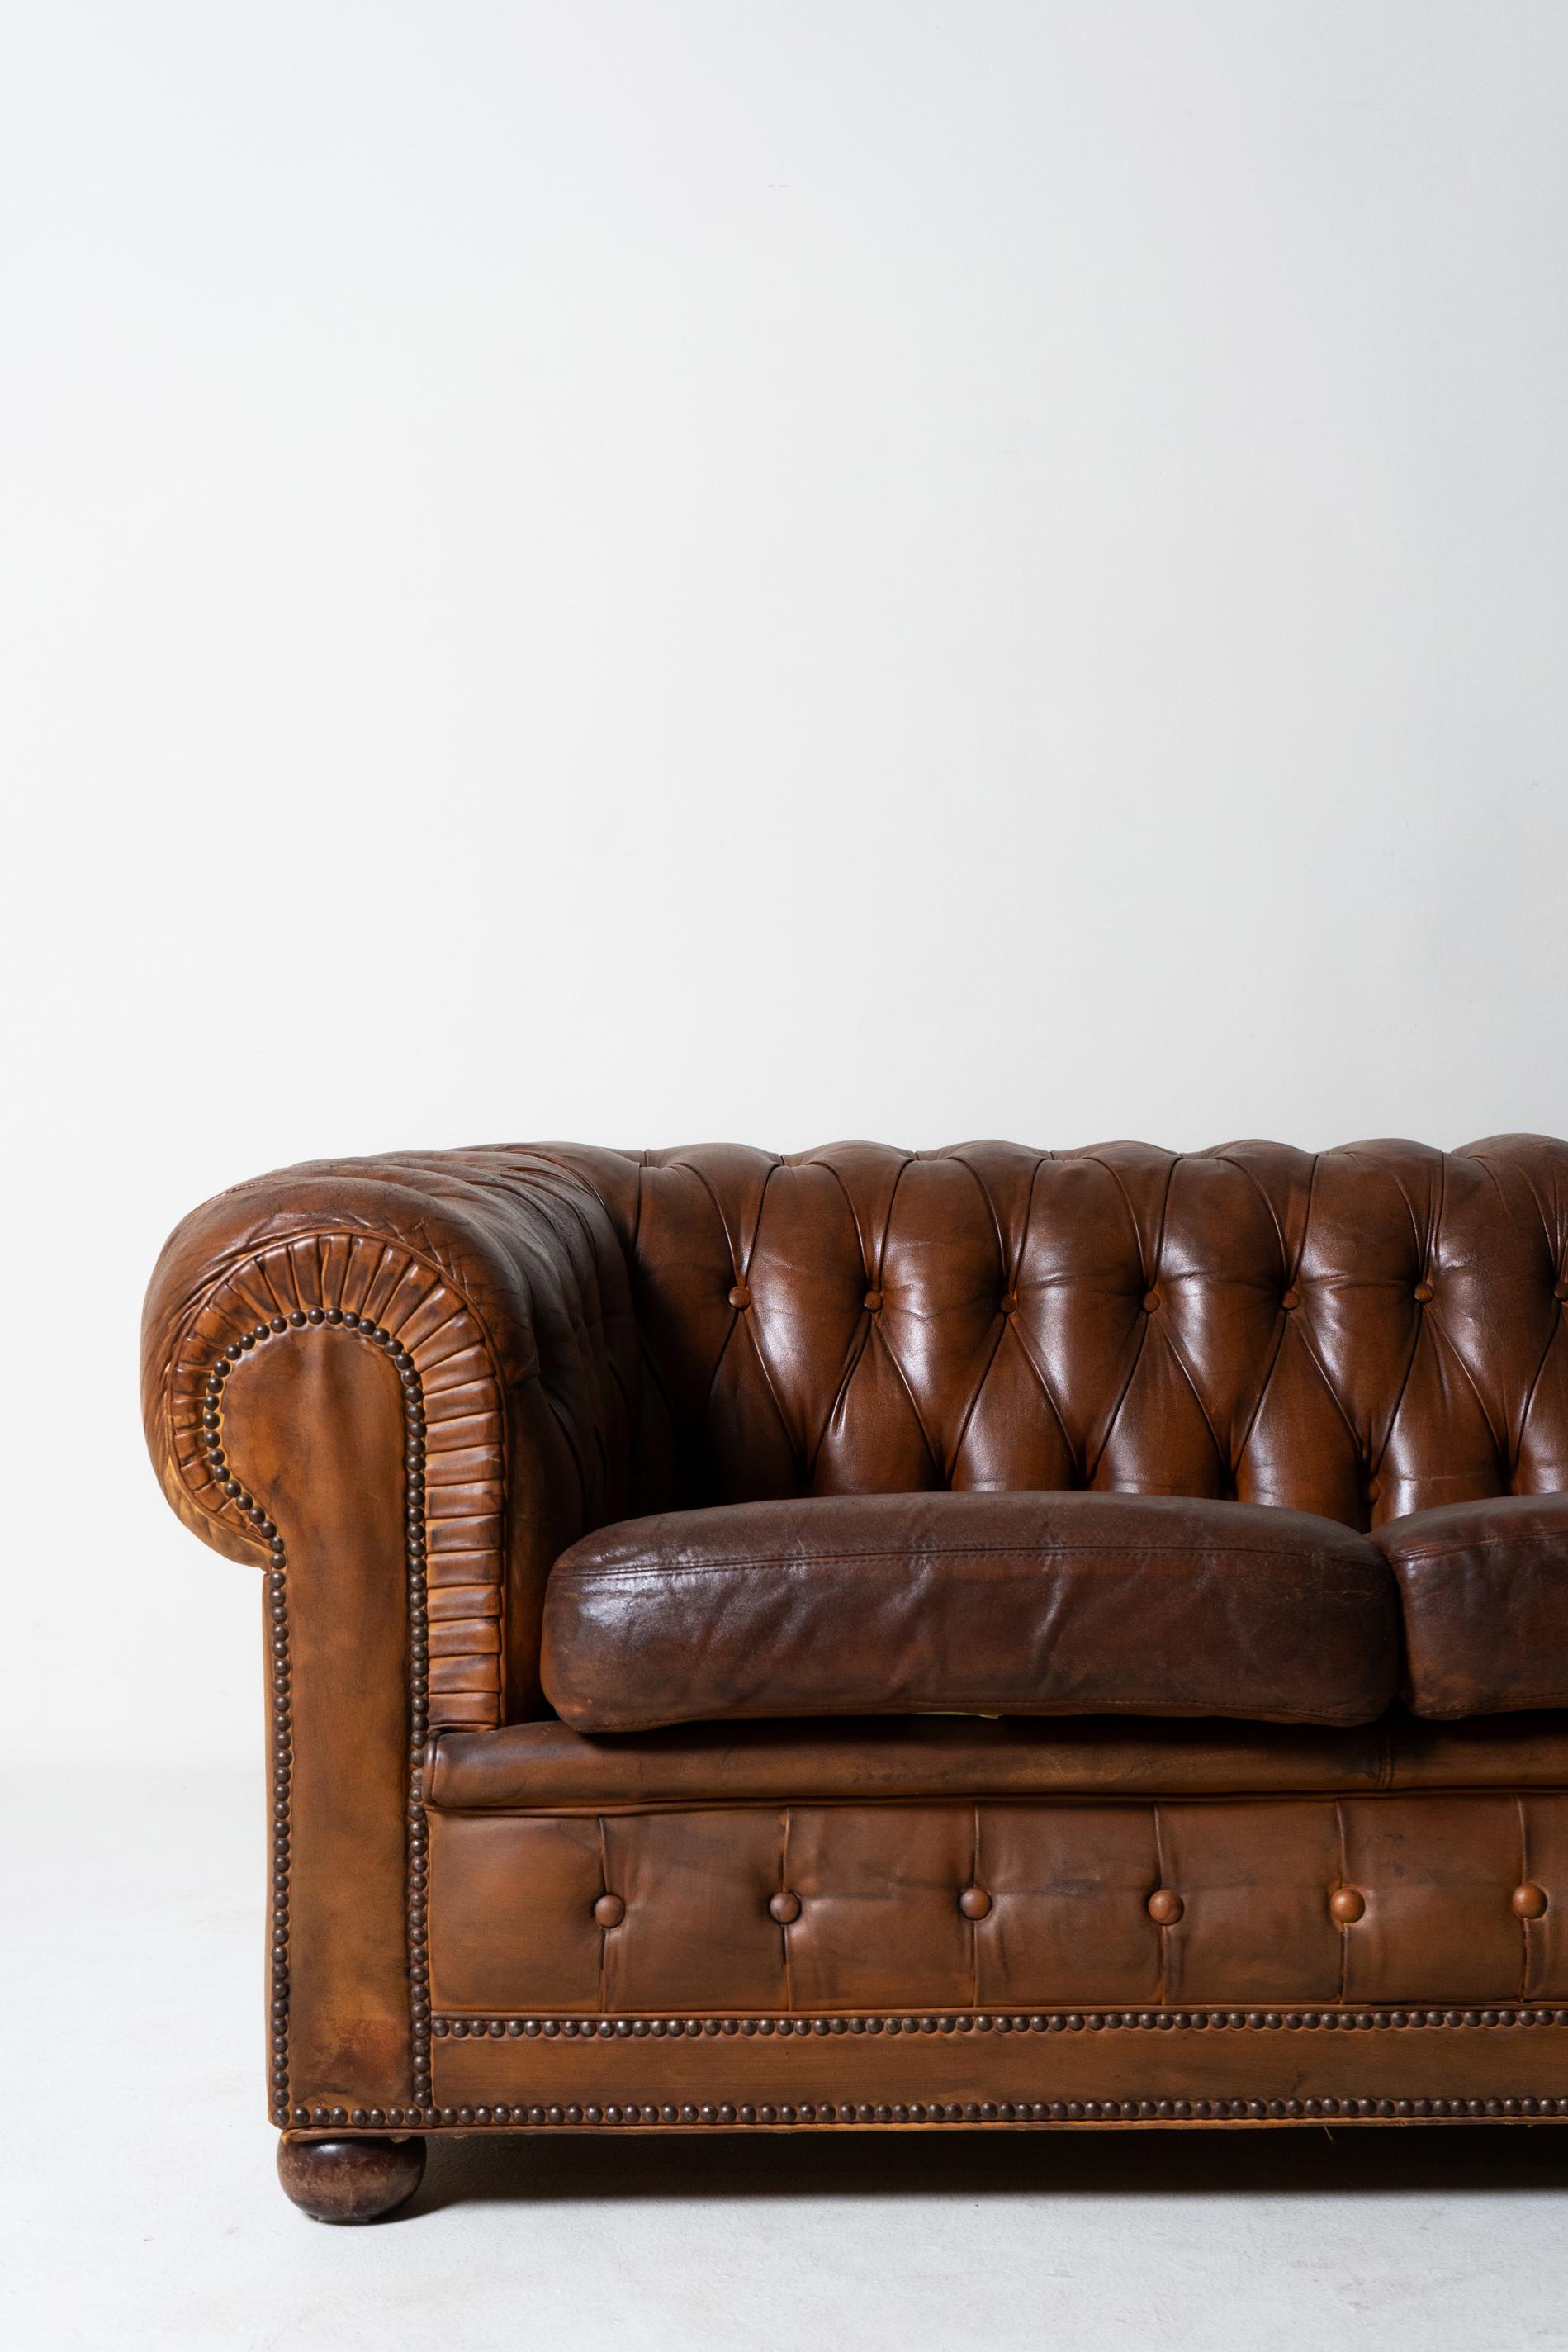 A Vintage Chesterfield Leather Sofa, France c.1960 For Sale 6